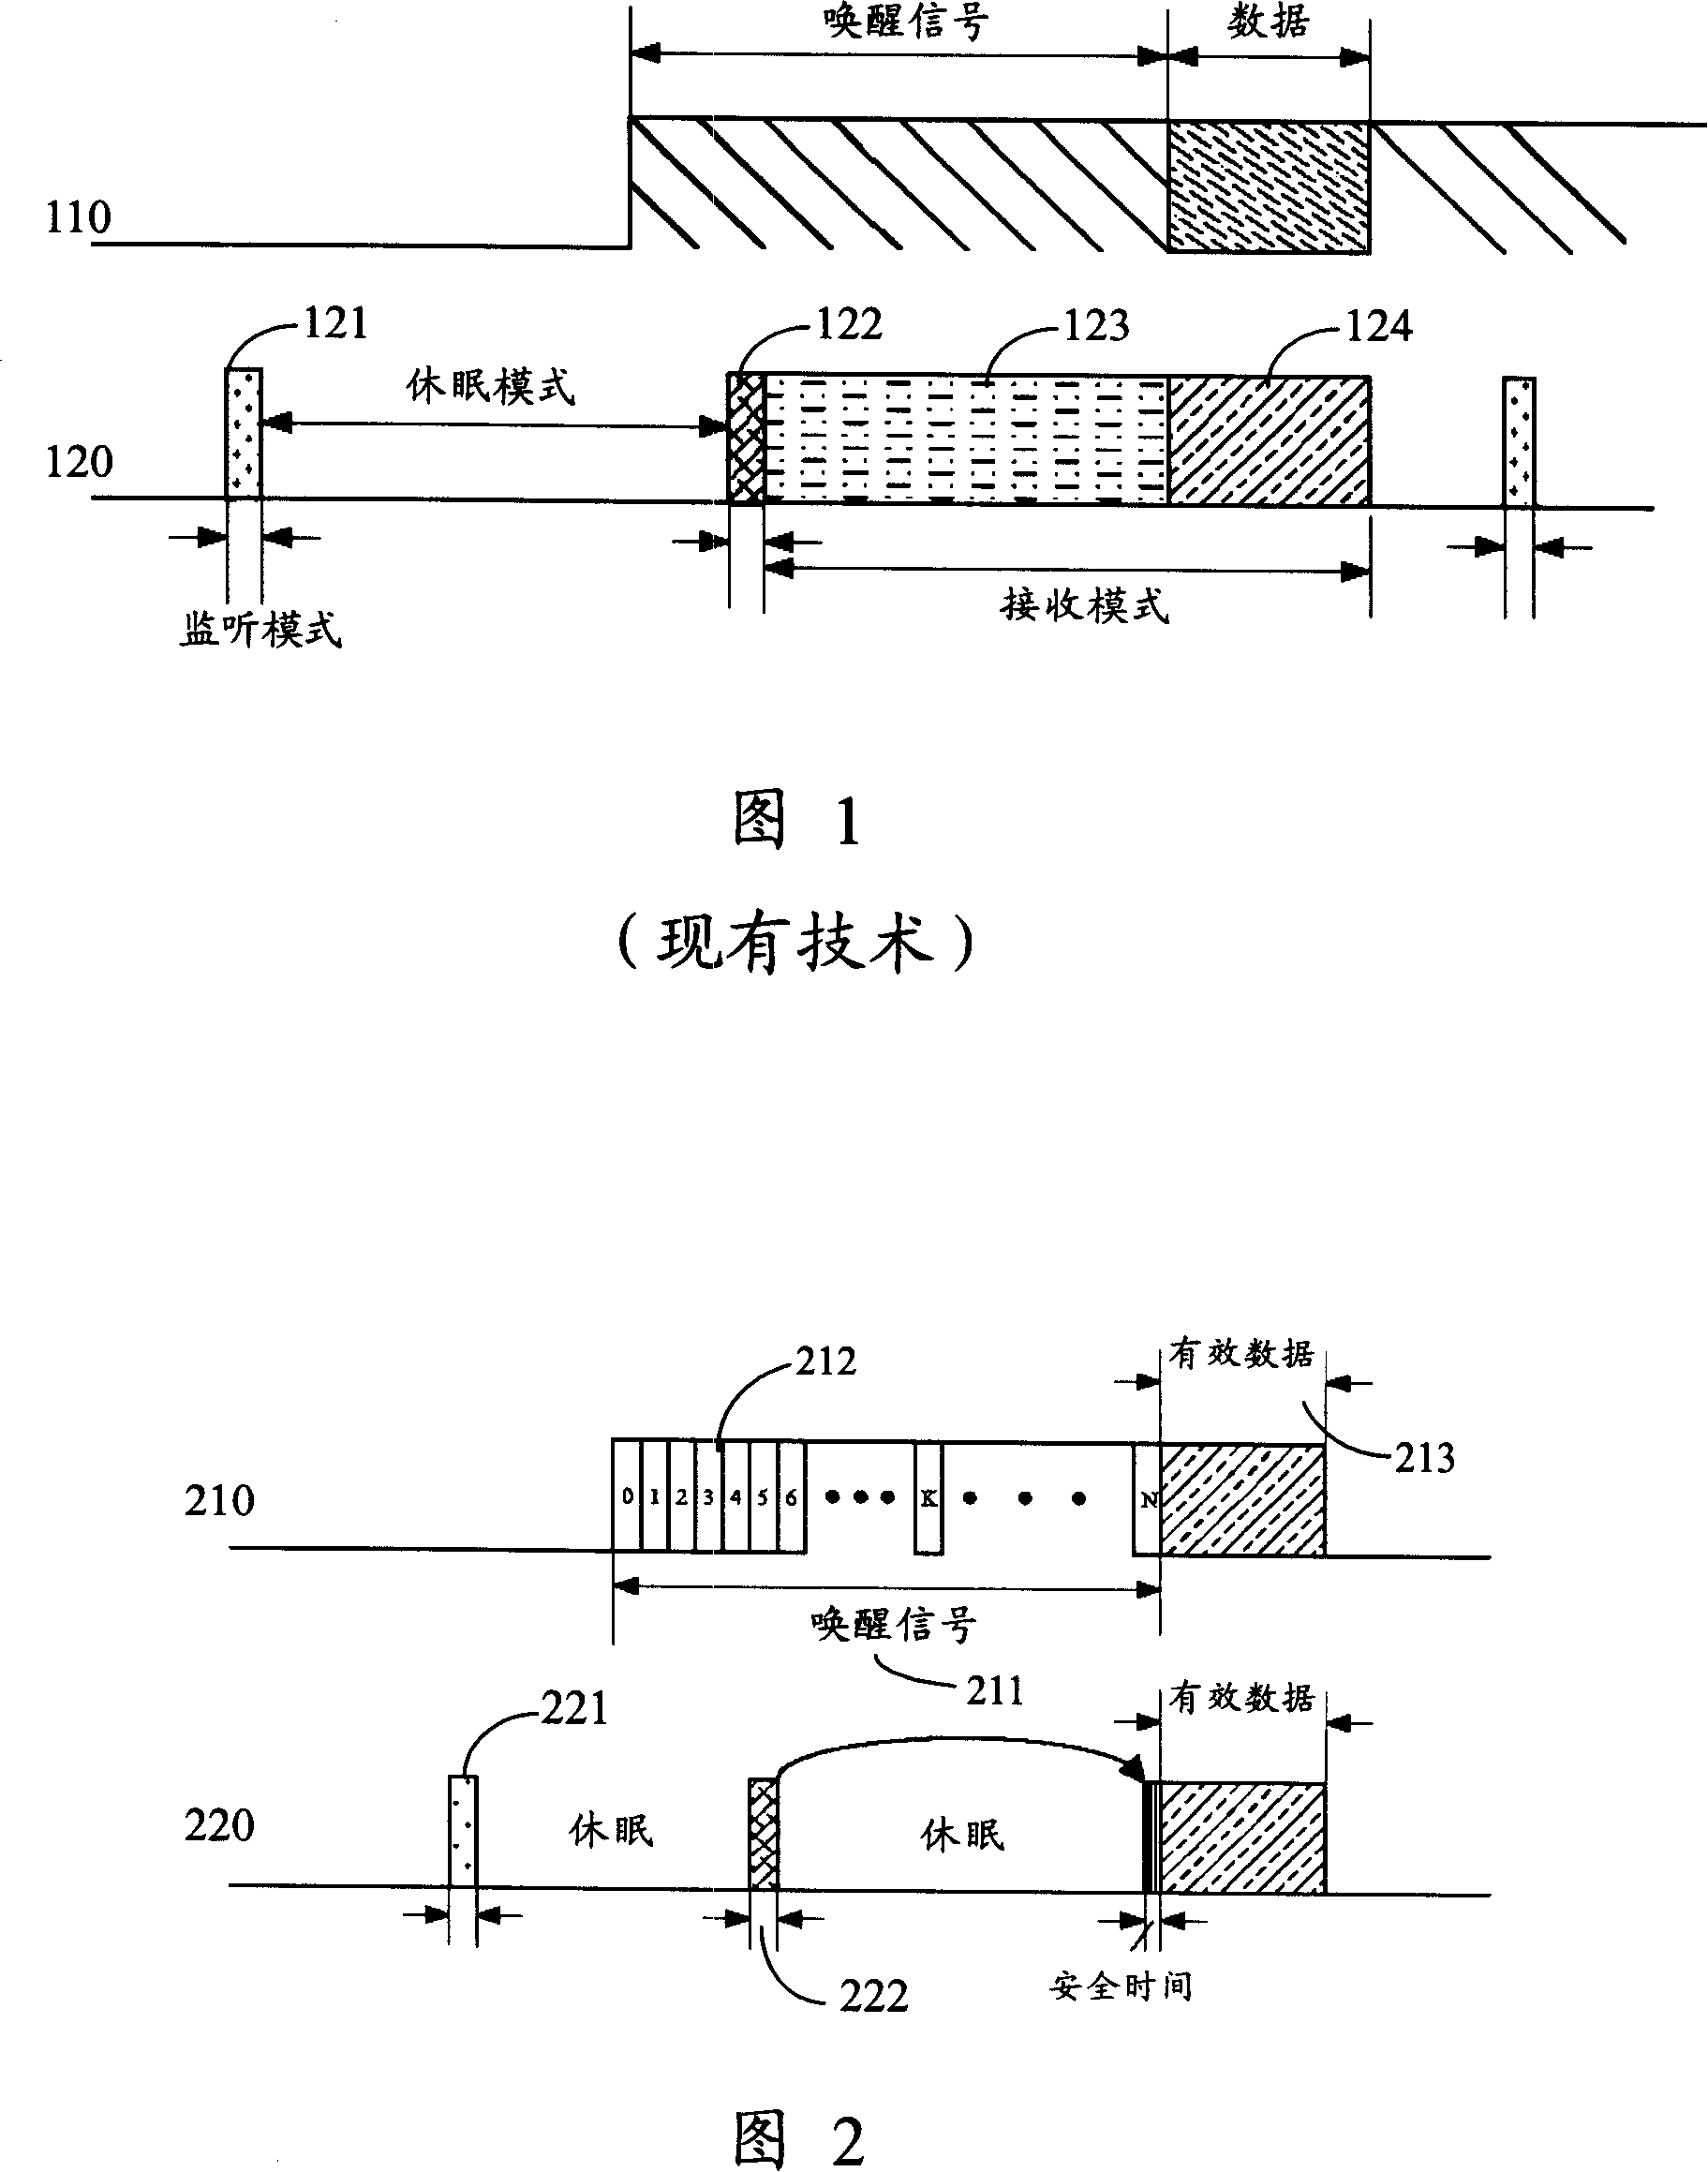 RFID system and method for operating the system under energy-saving mode